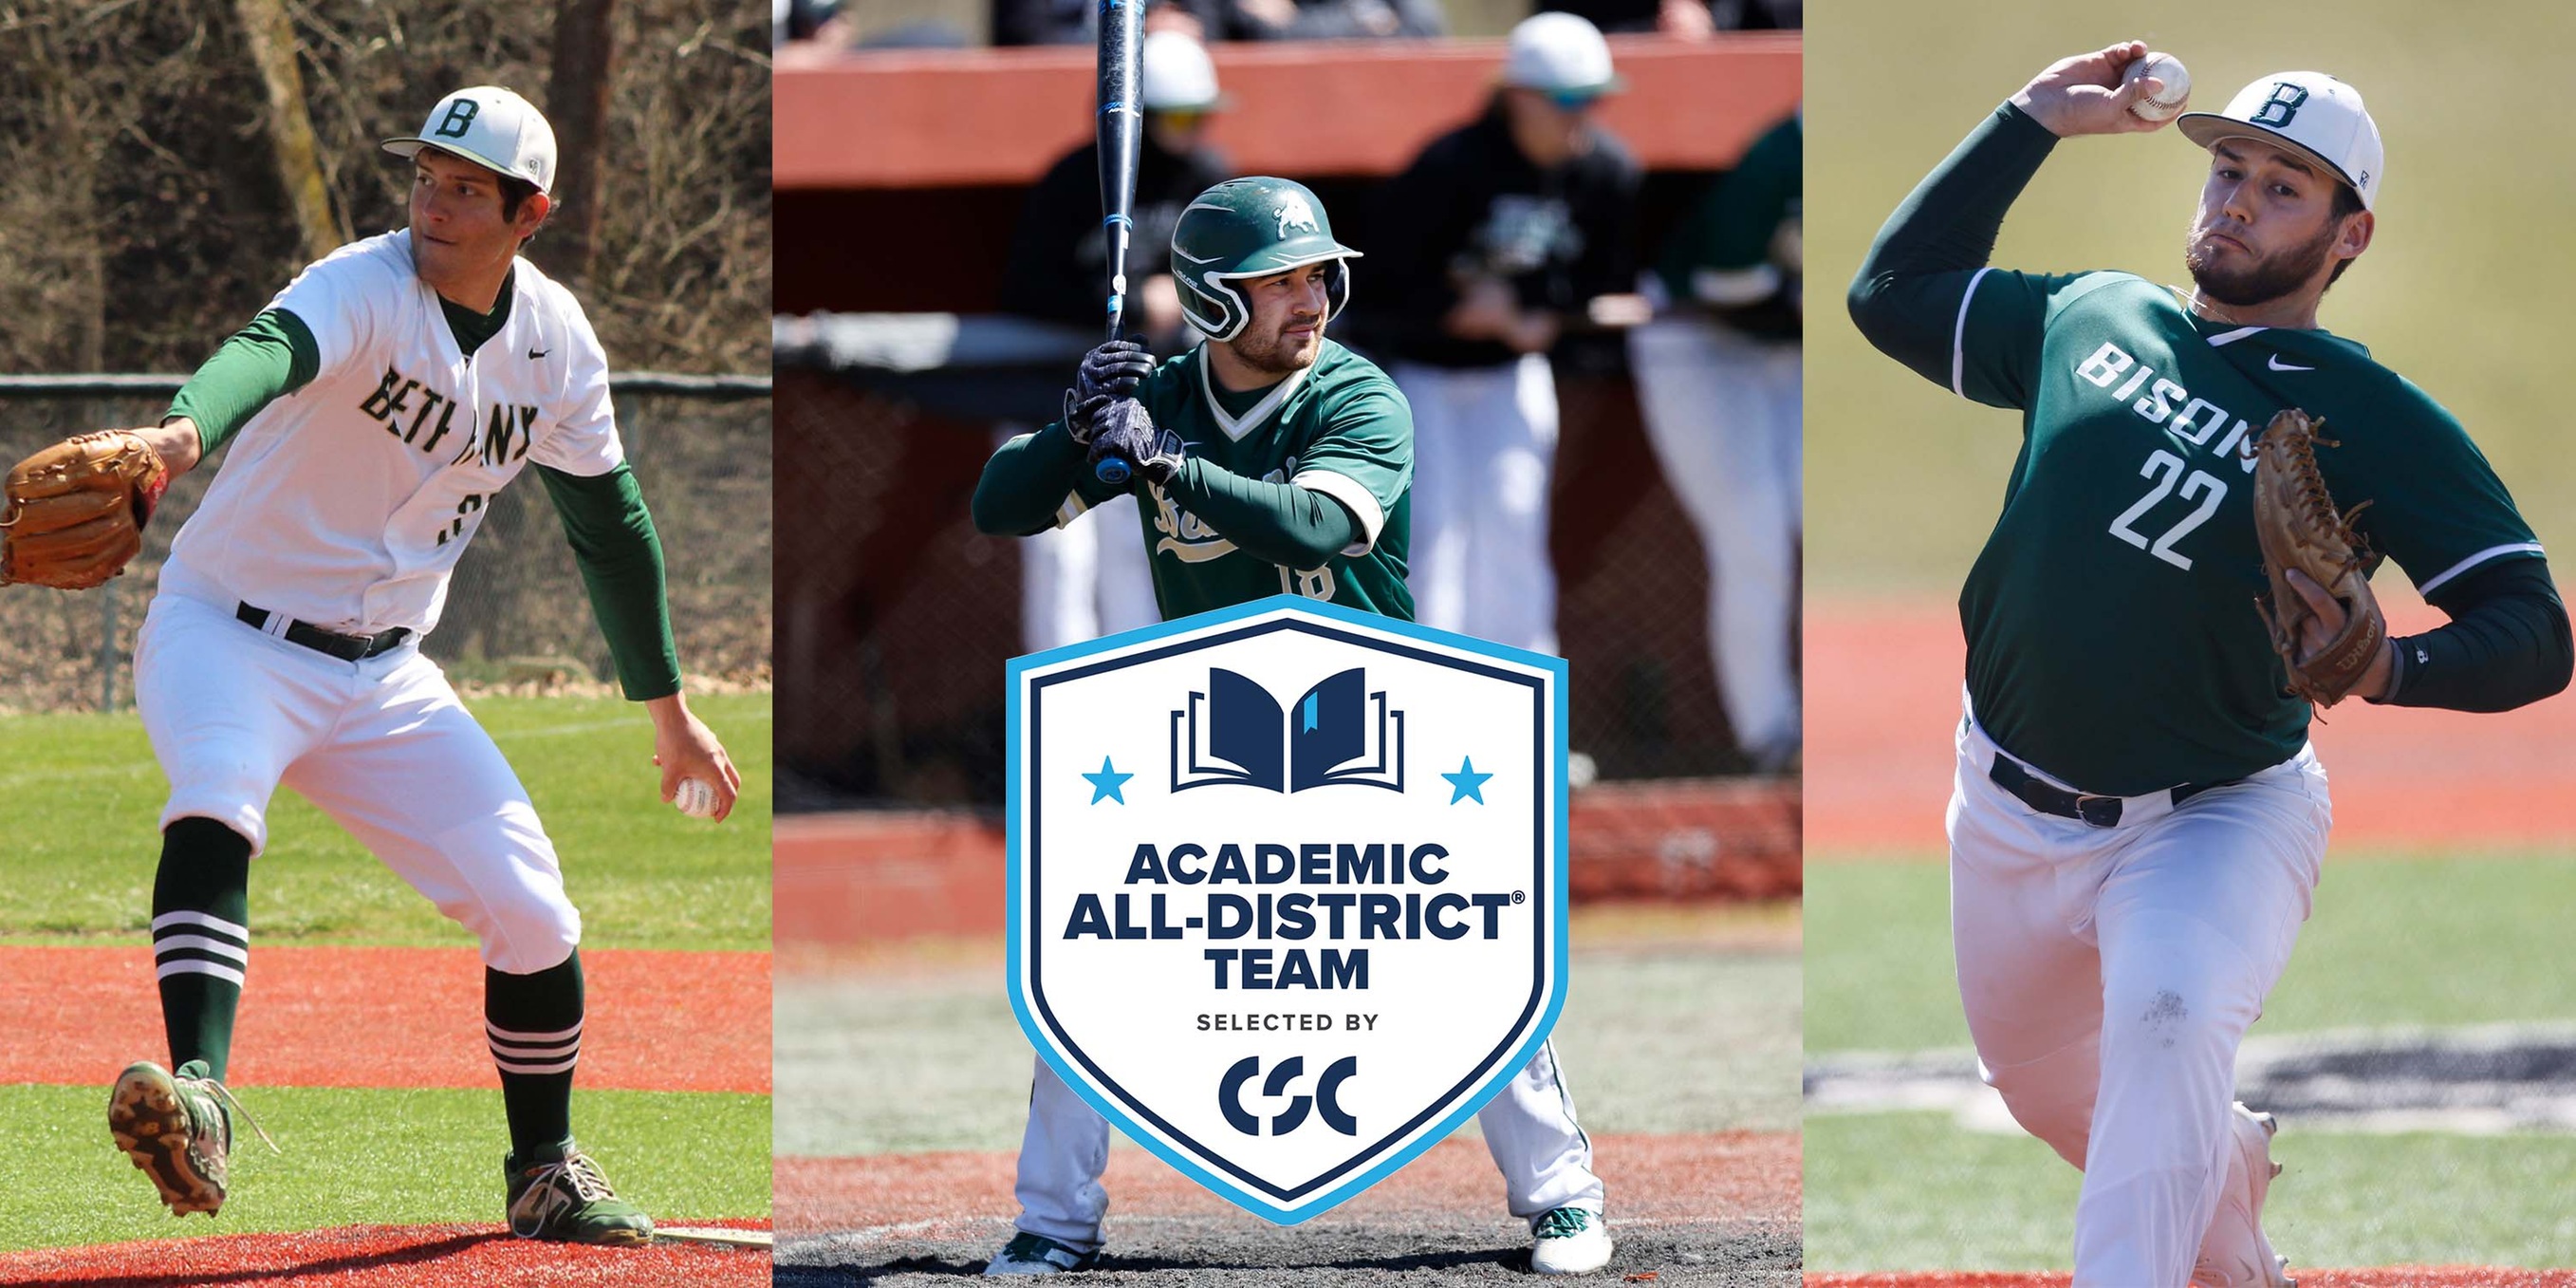 Baseball: Three Bison earn Academic All-District honors from College Sports Communicators